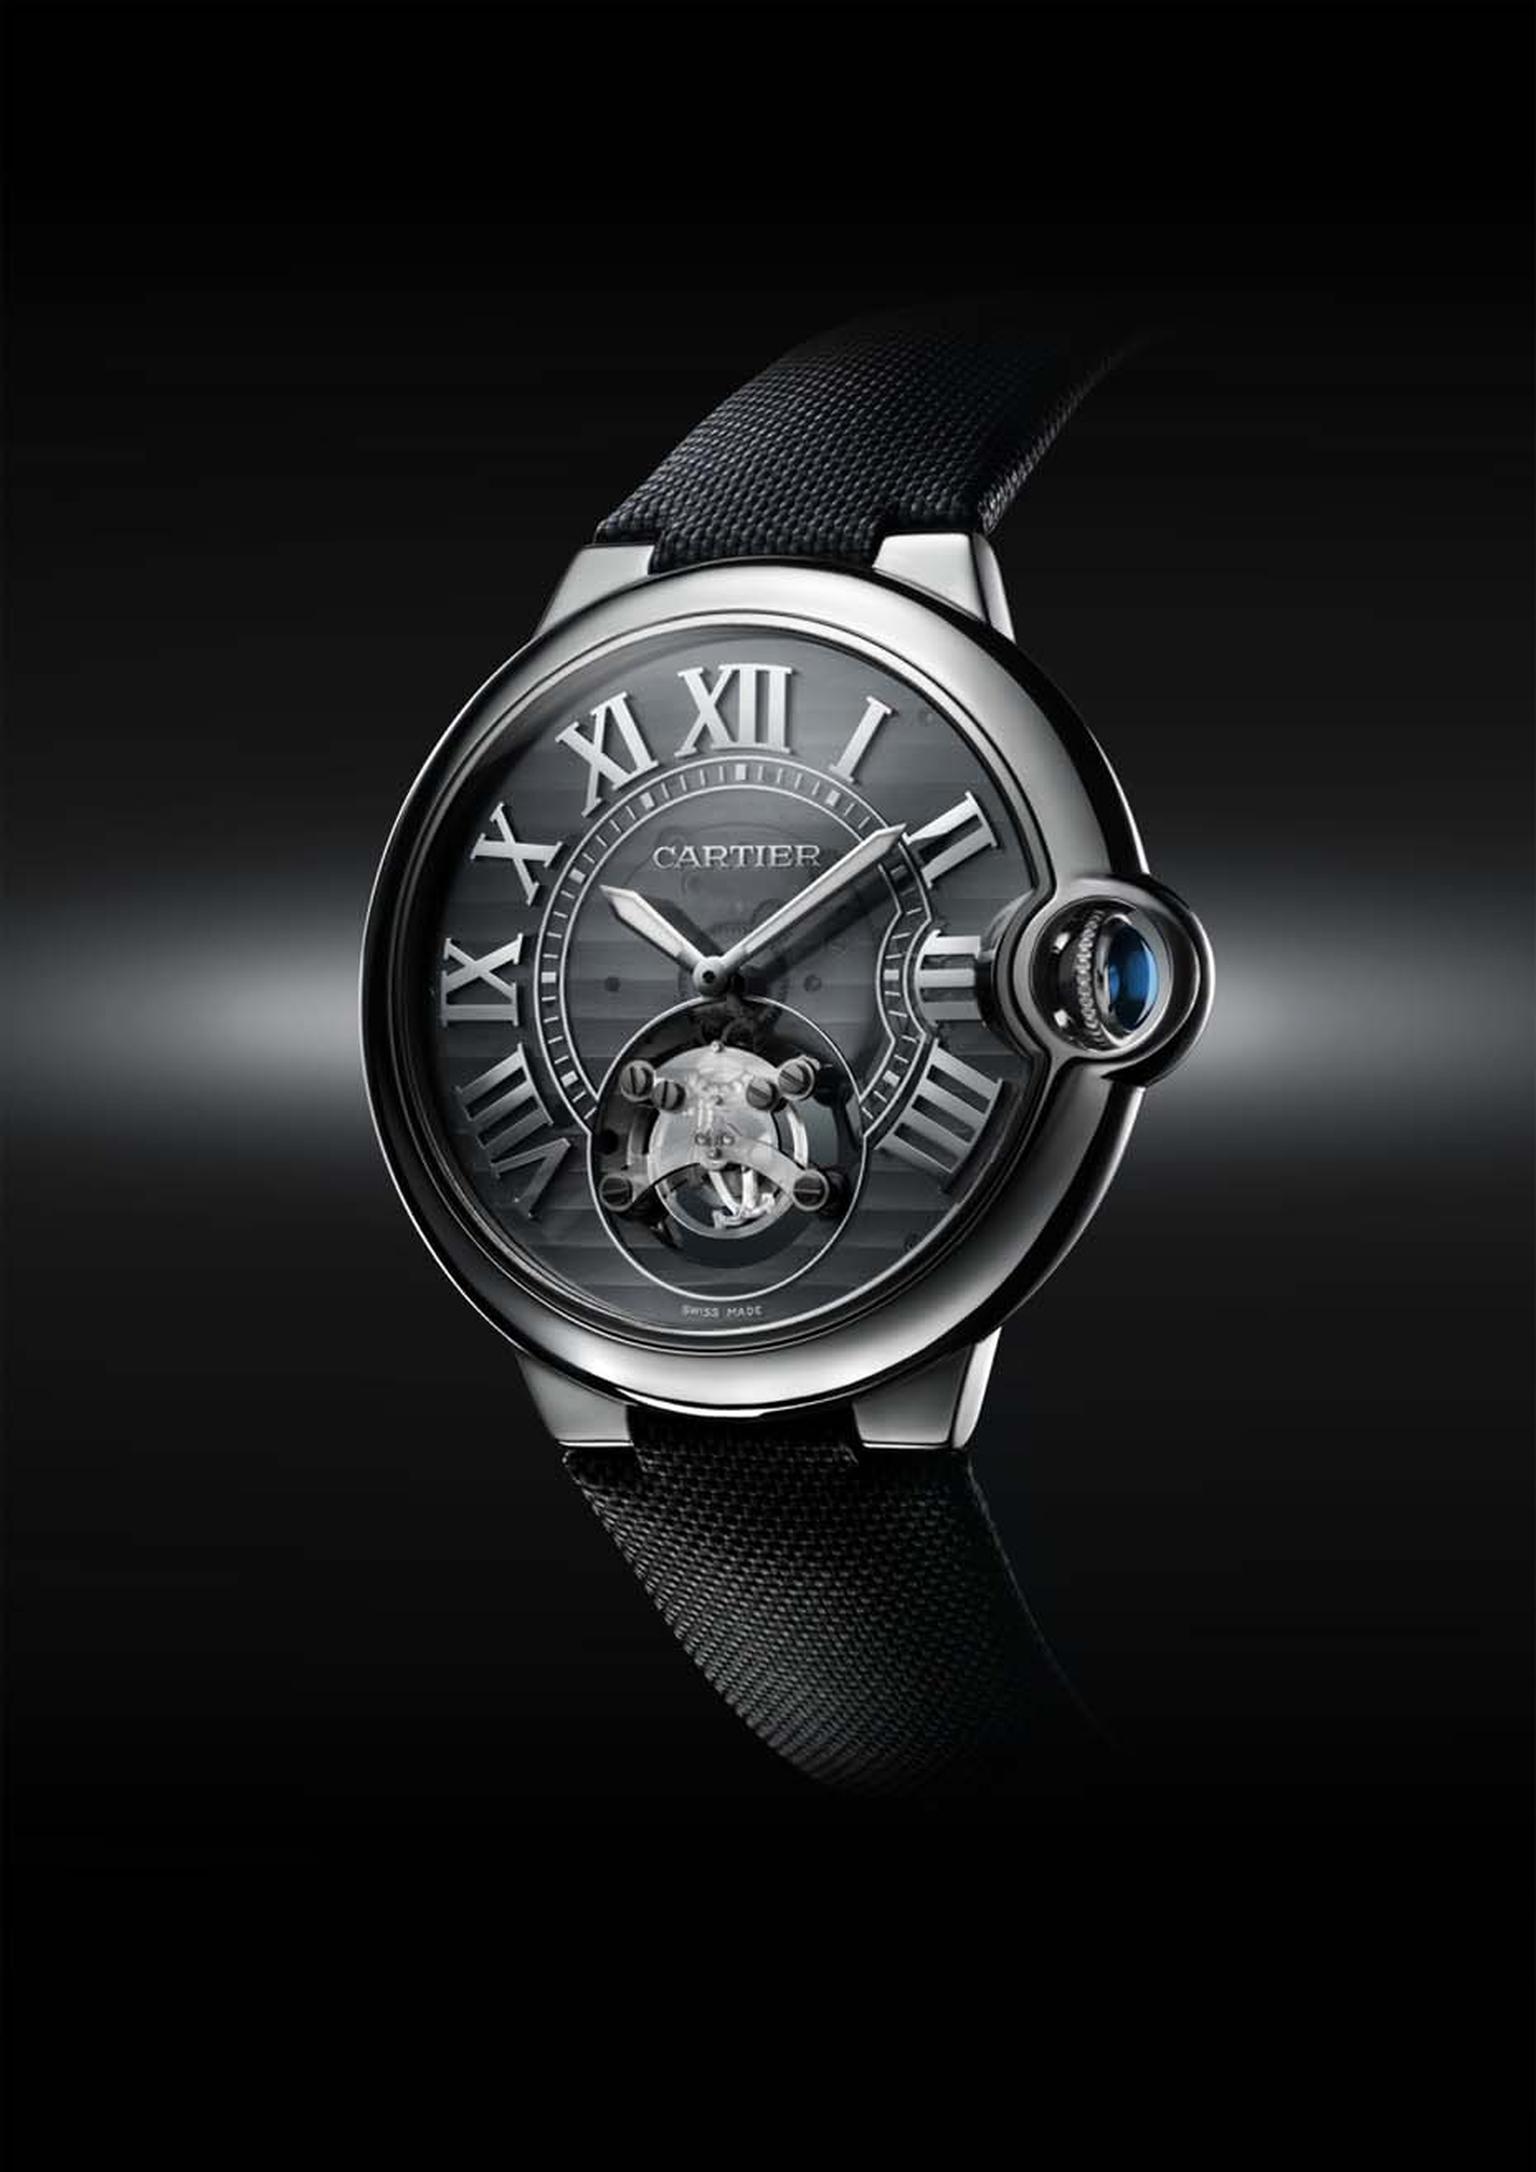 The Cartier IDONE concept watch is on display until 19 November at The Man by Cartier pop-up store at Harrods.